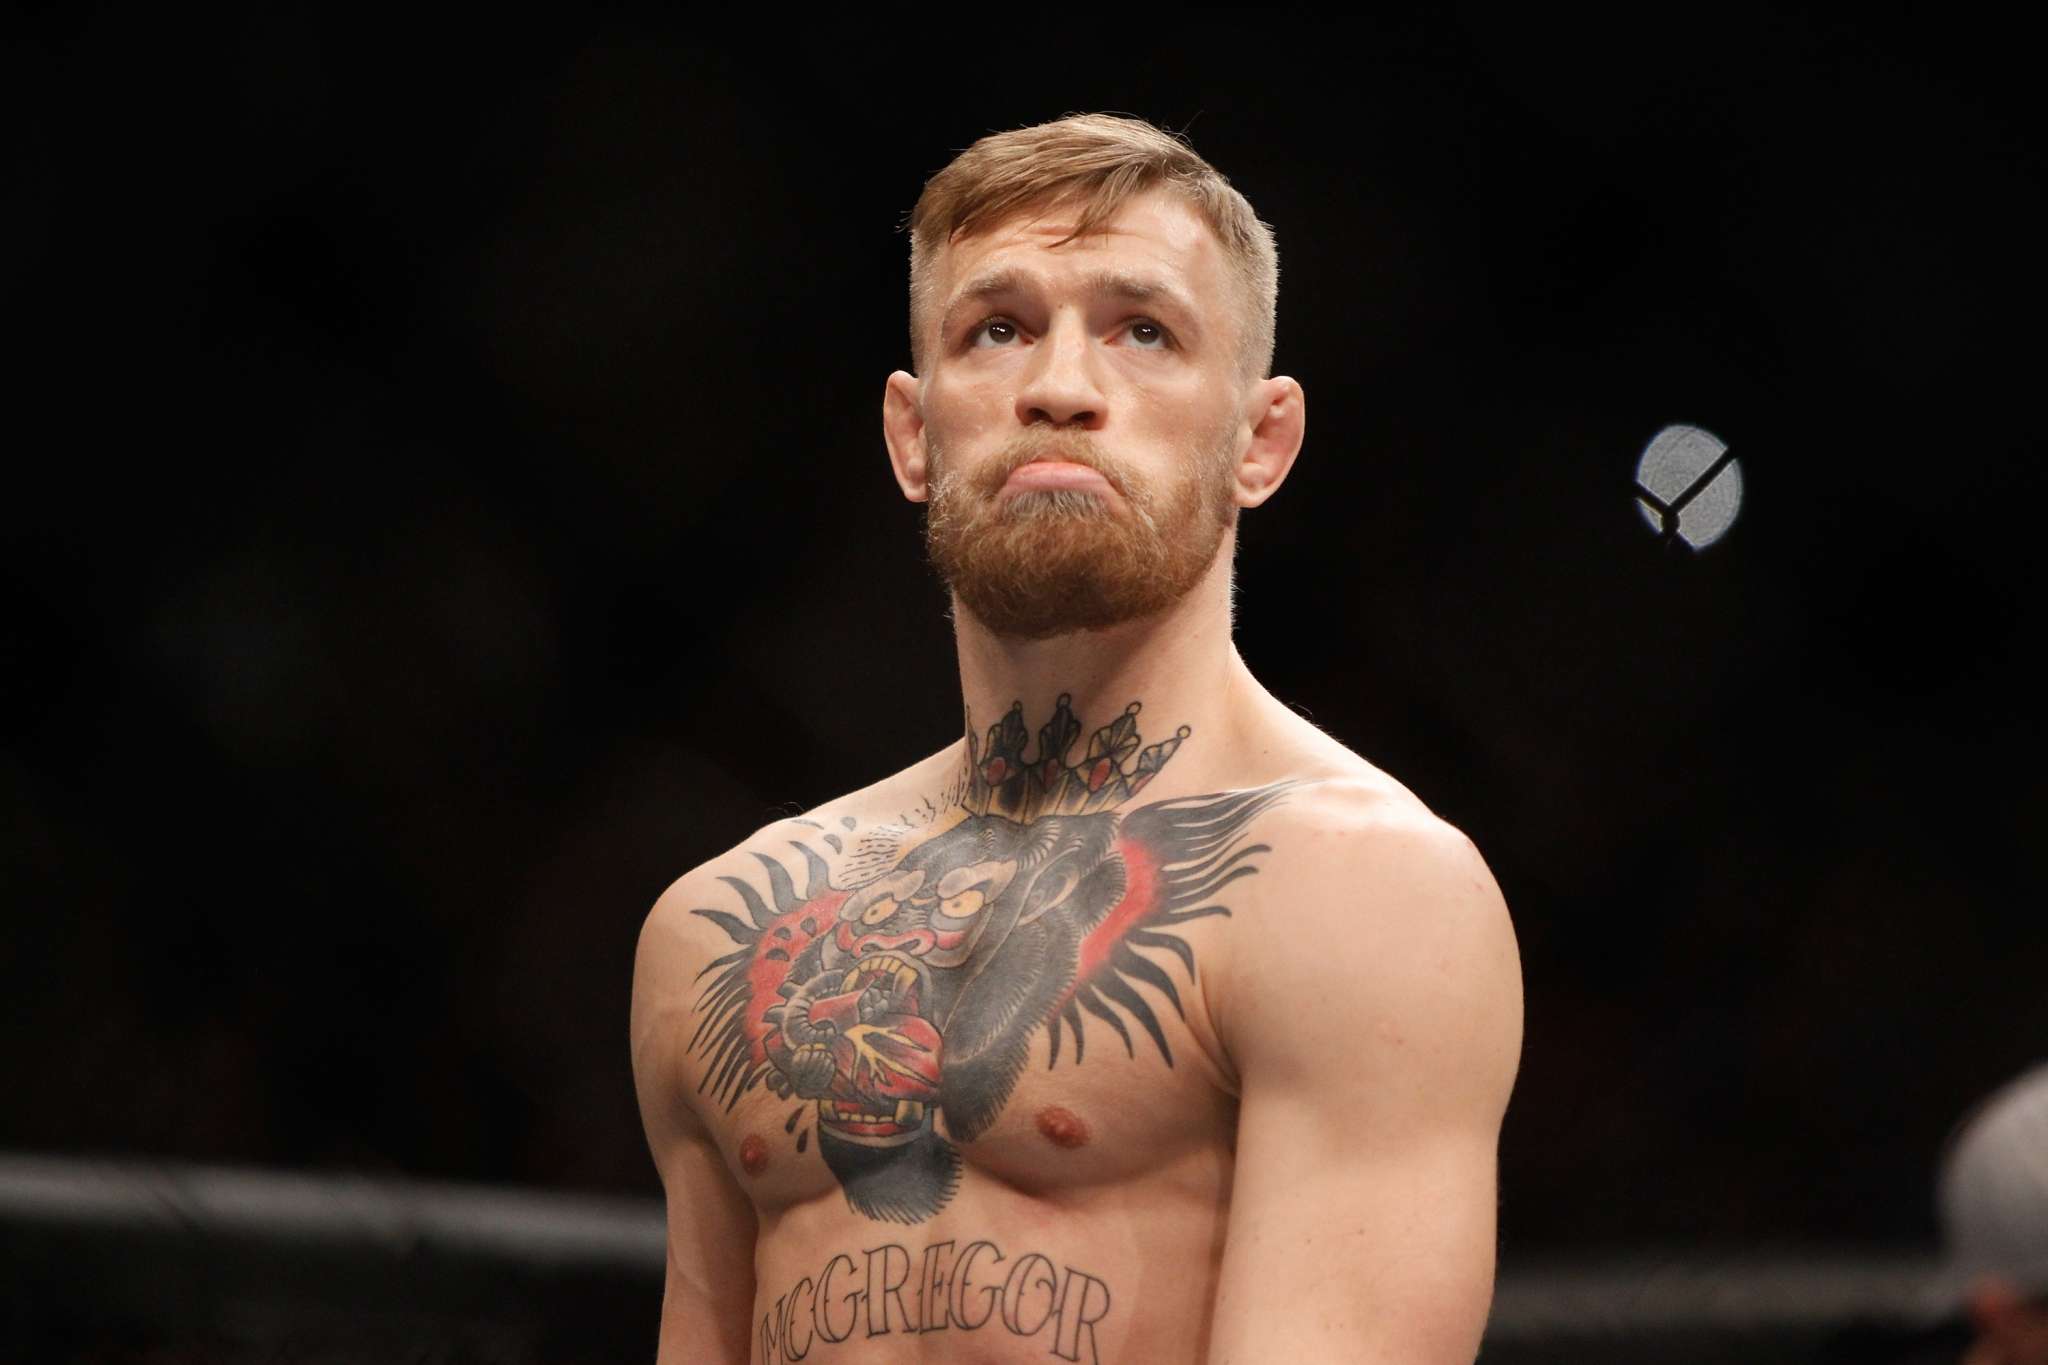 Conor McGregor Arrested & Charged With 'Strong-Armed Robbery' - He Slapped A Phone Out Of Fan's Hand And Stomped On It